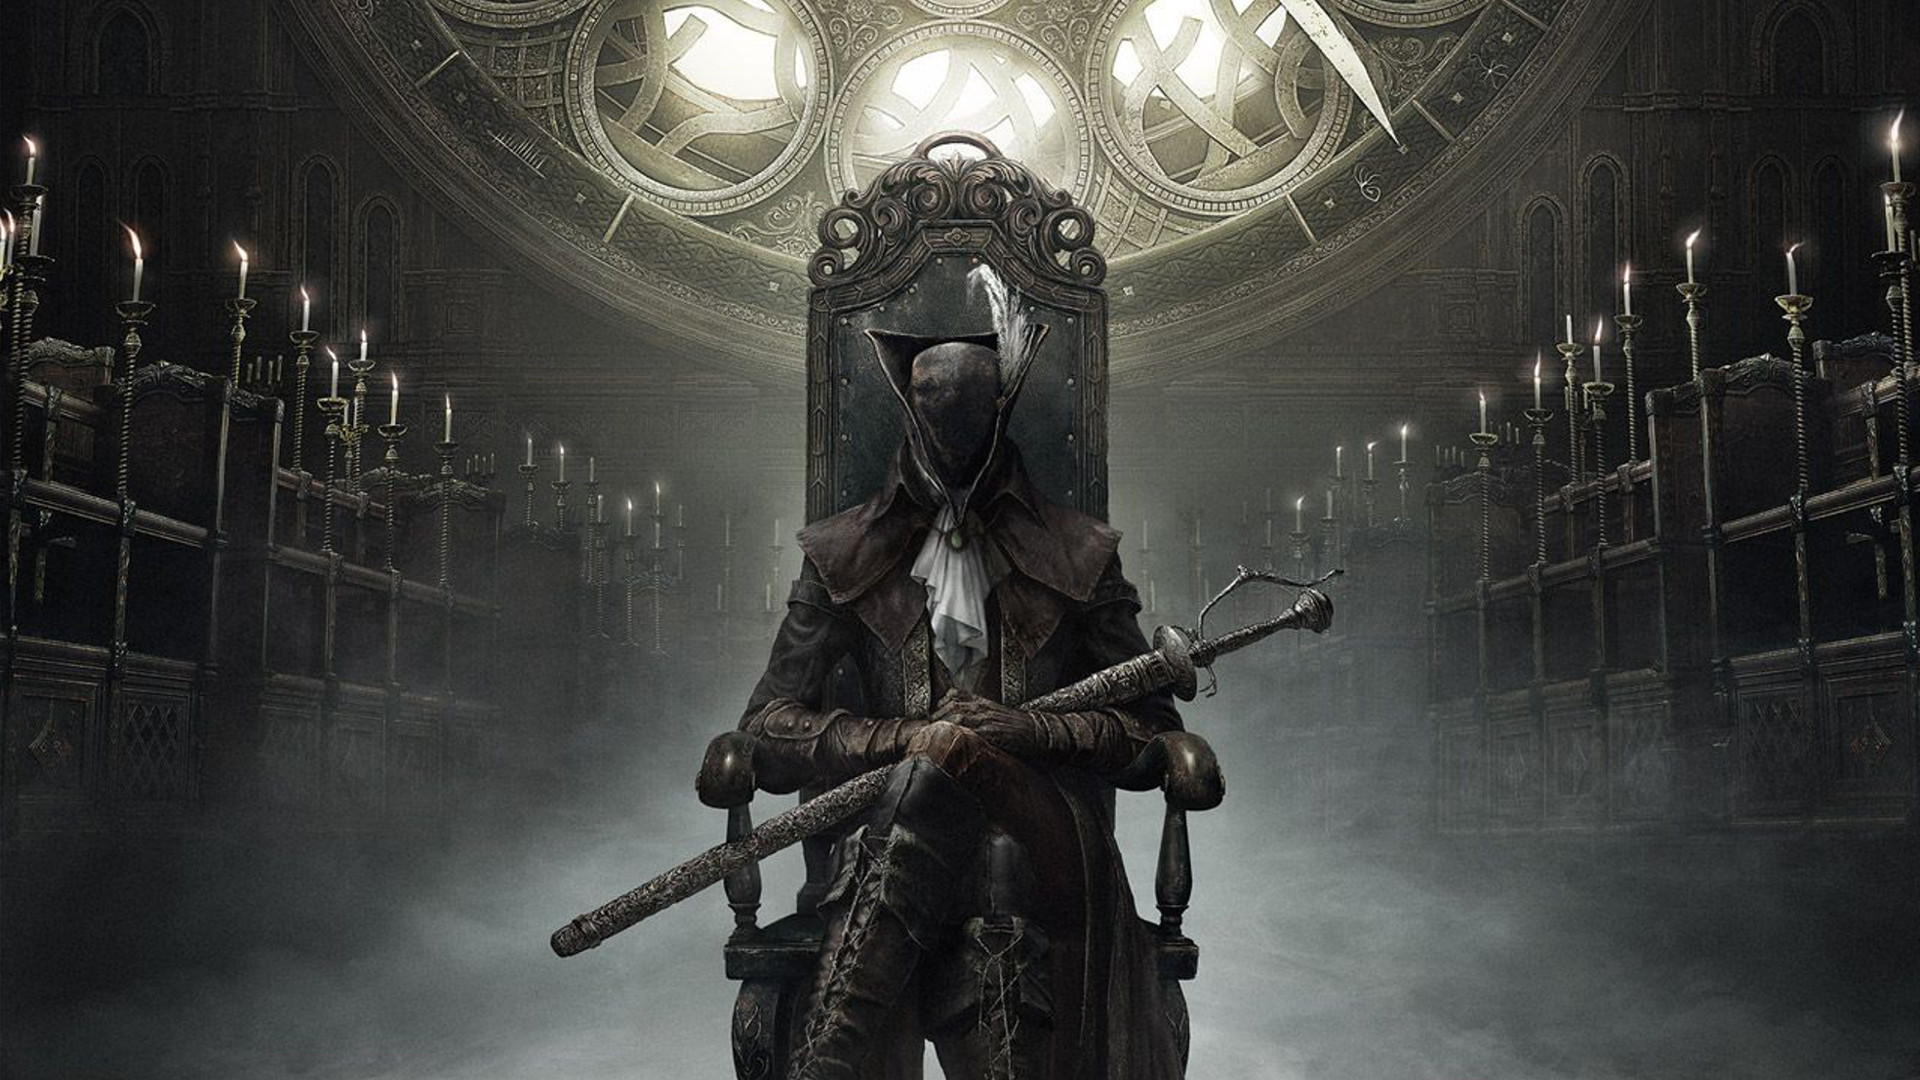 Expansion - Bloodborne The Old Hunters Wallpaper Hd - HD Wallpaper 